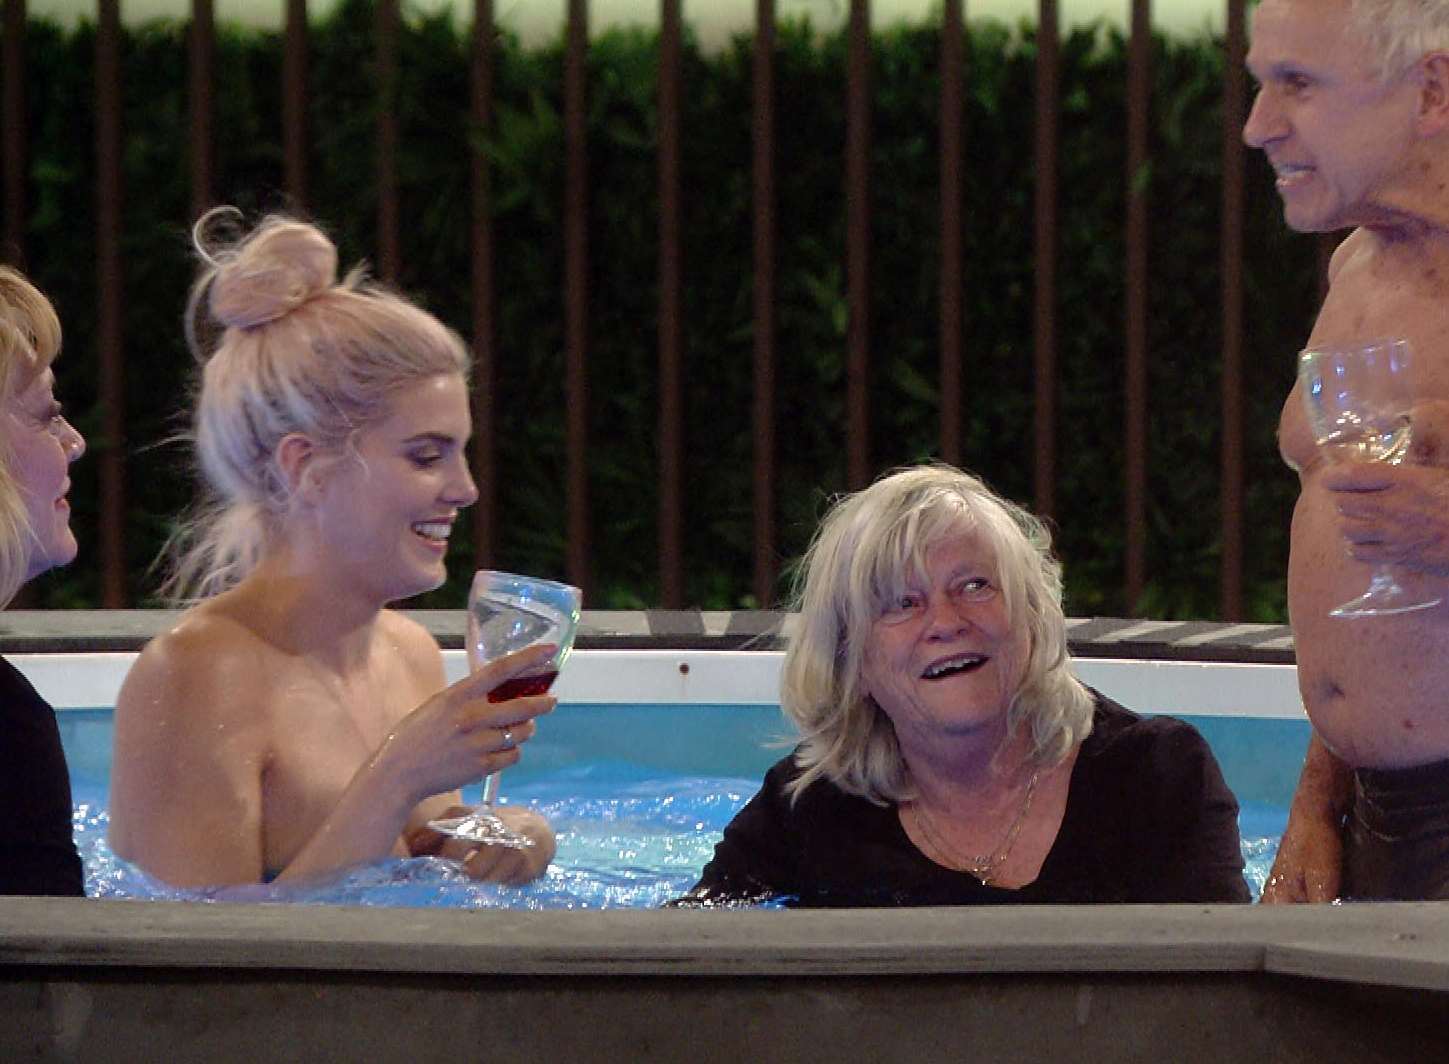 Ann climbed into the house Jacuzzi fully clothed on Monday.